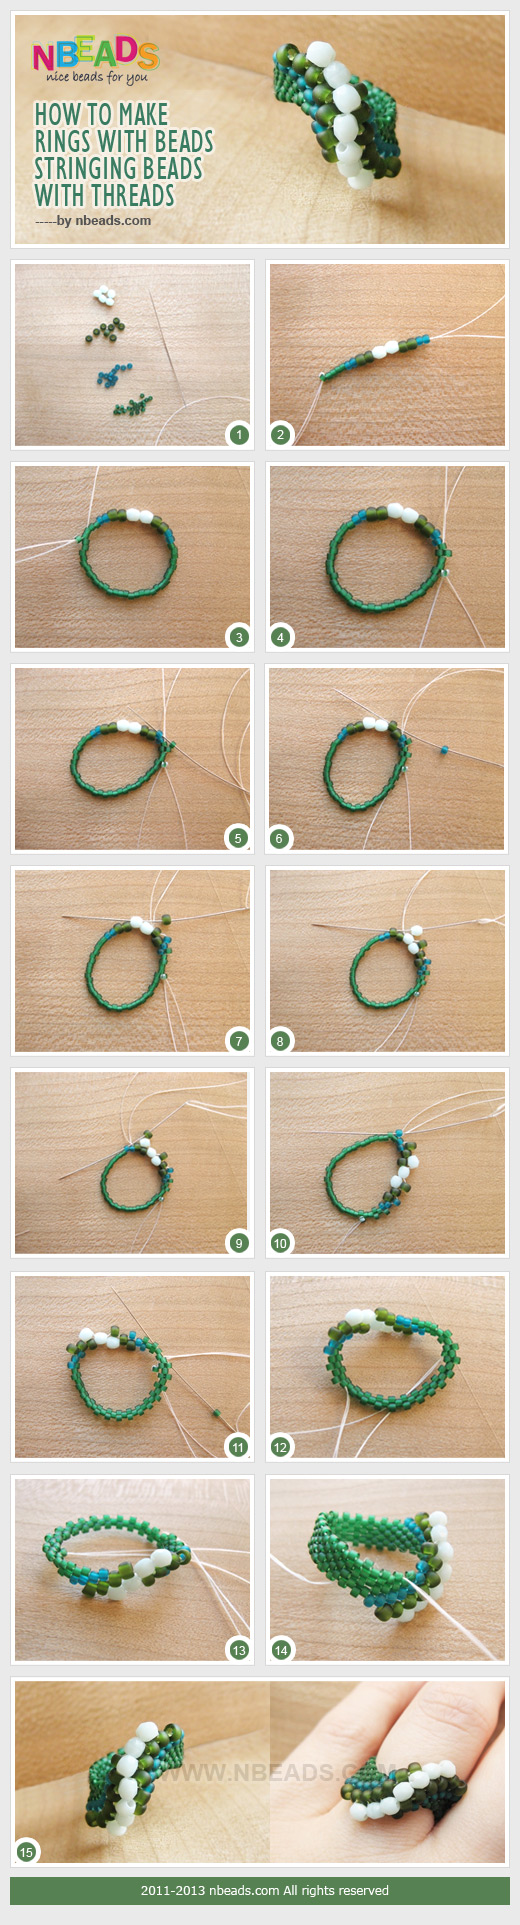 how to make rings with beads-stringing beads with threads